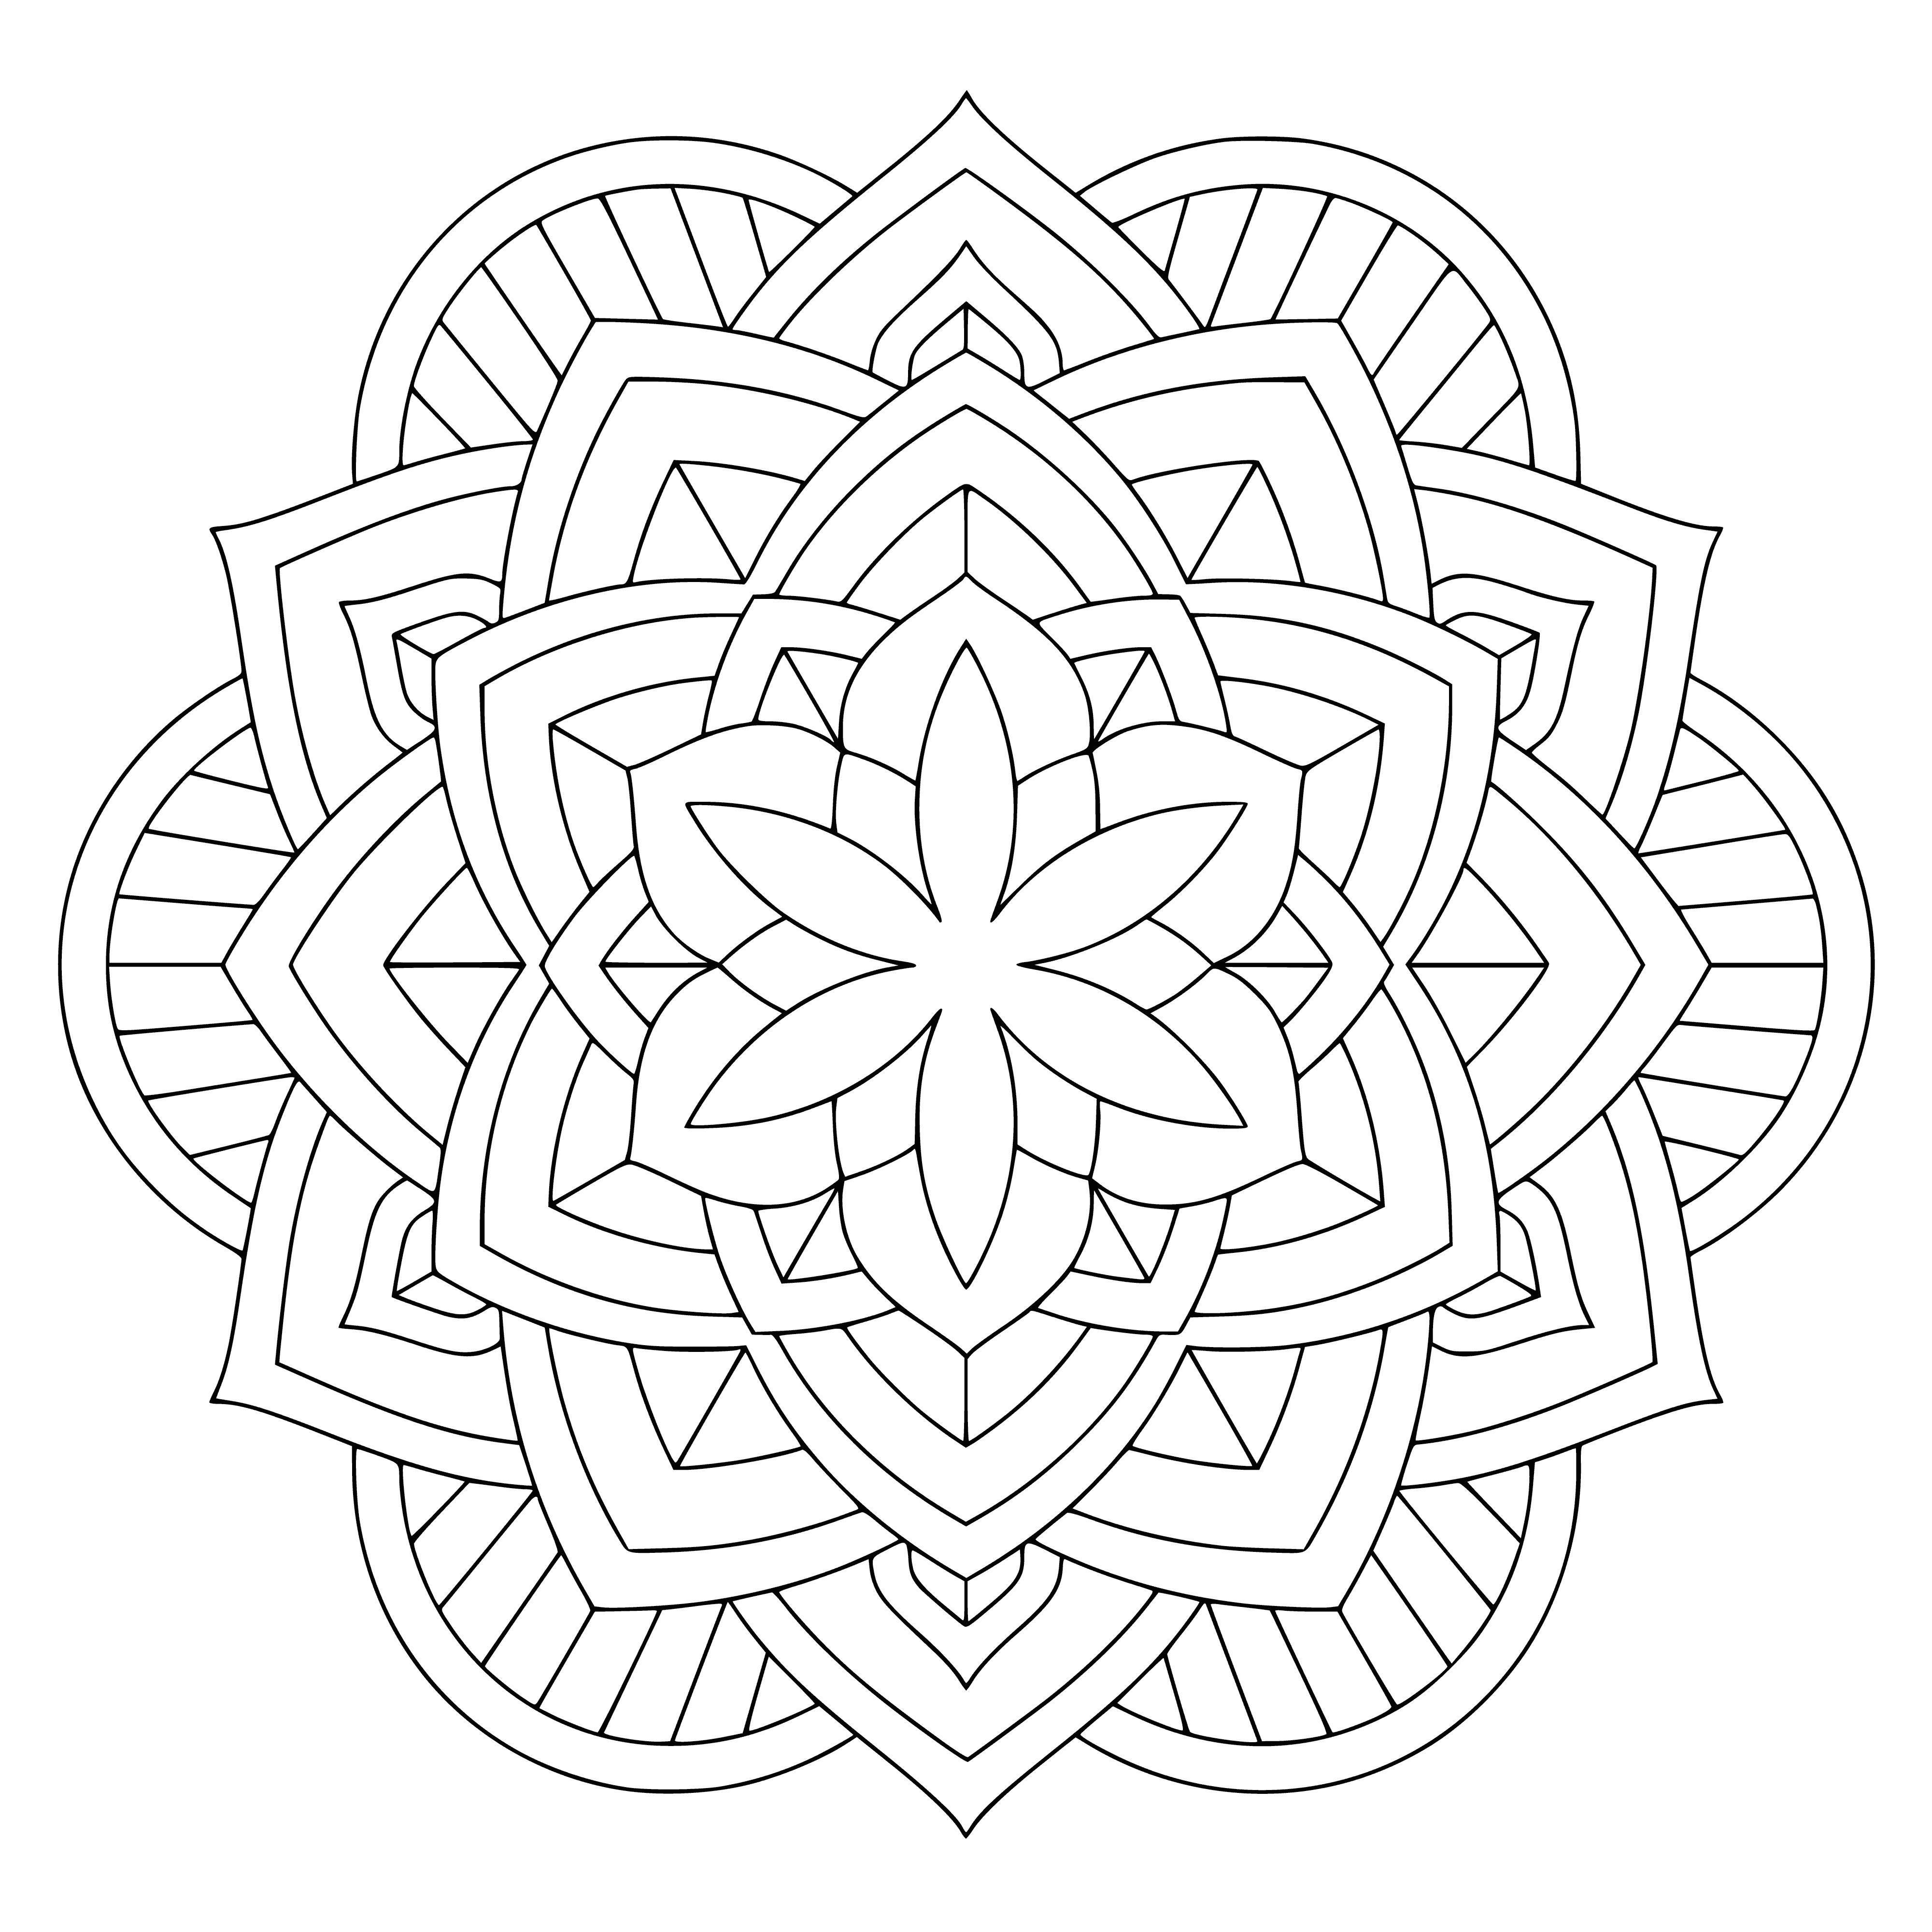 coloring page: Pretty flower mandala coloring page with circular shape and petals, leaves and smaller flowers around it. #coloringpages #mandalas